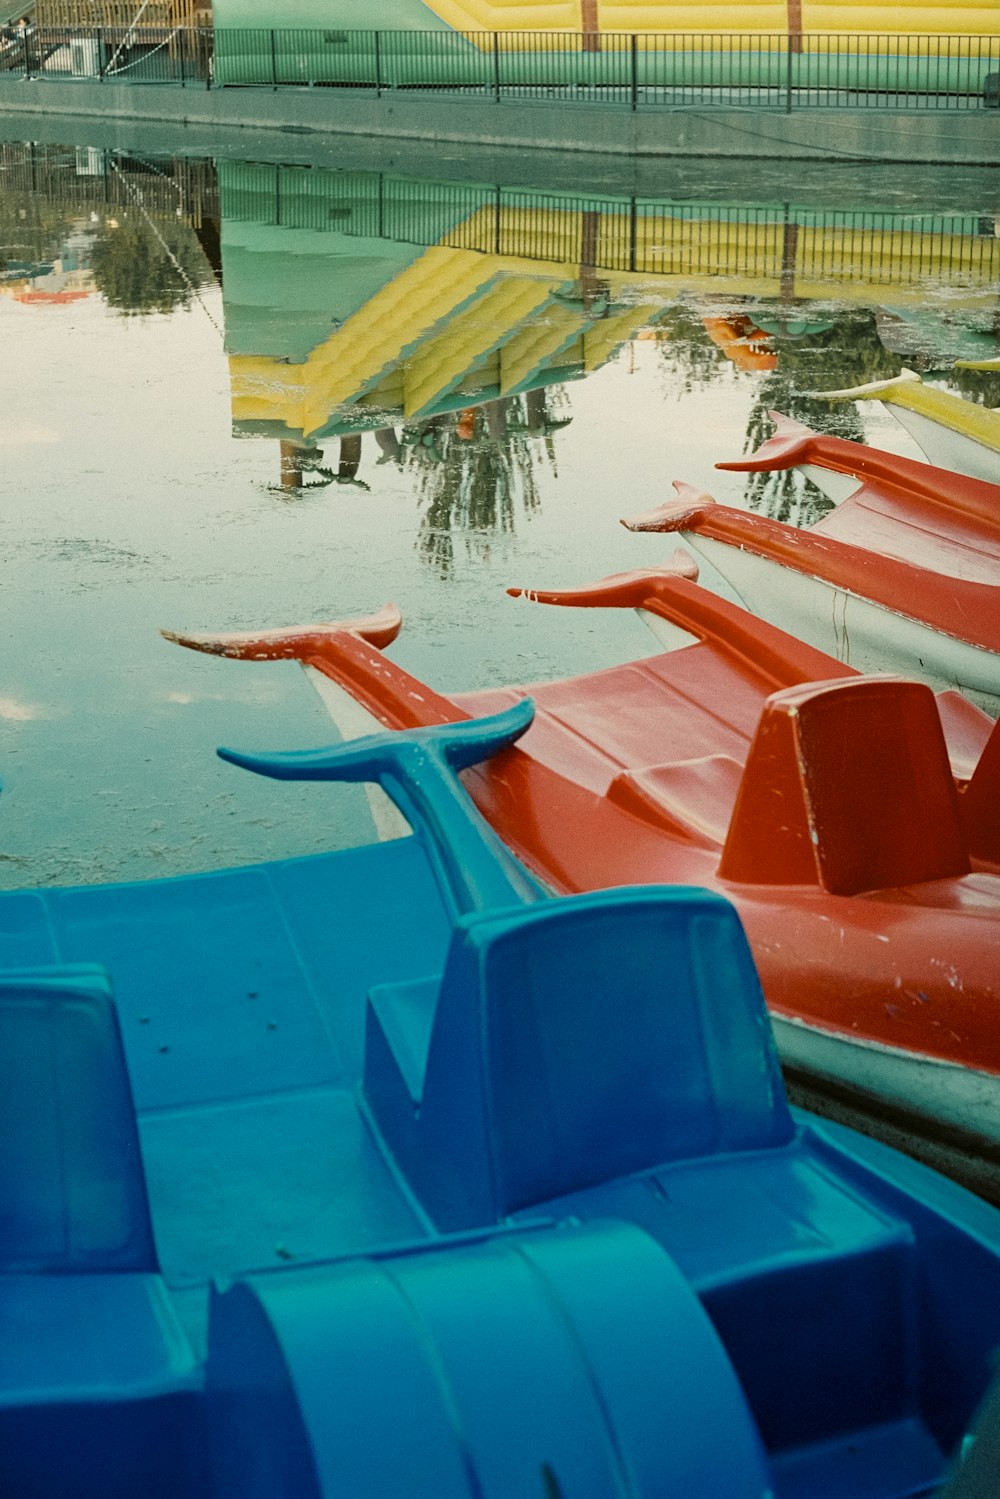 a row of red and blue boats sitting next to each other